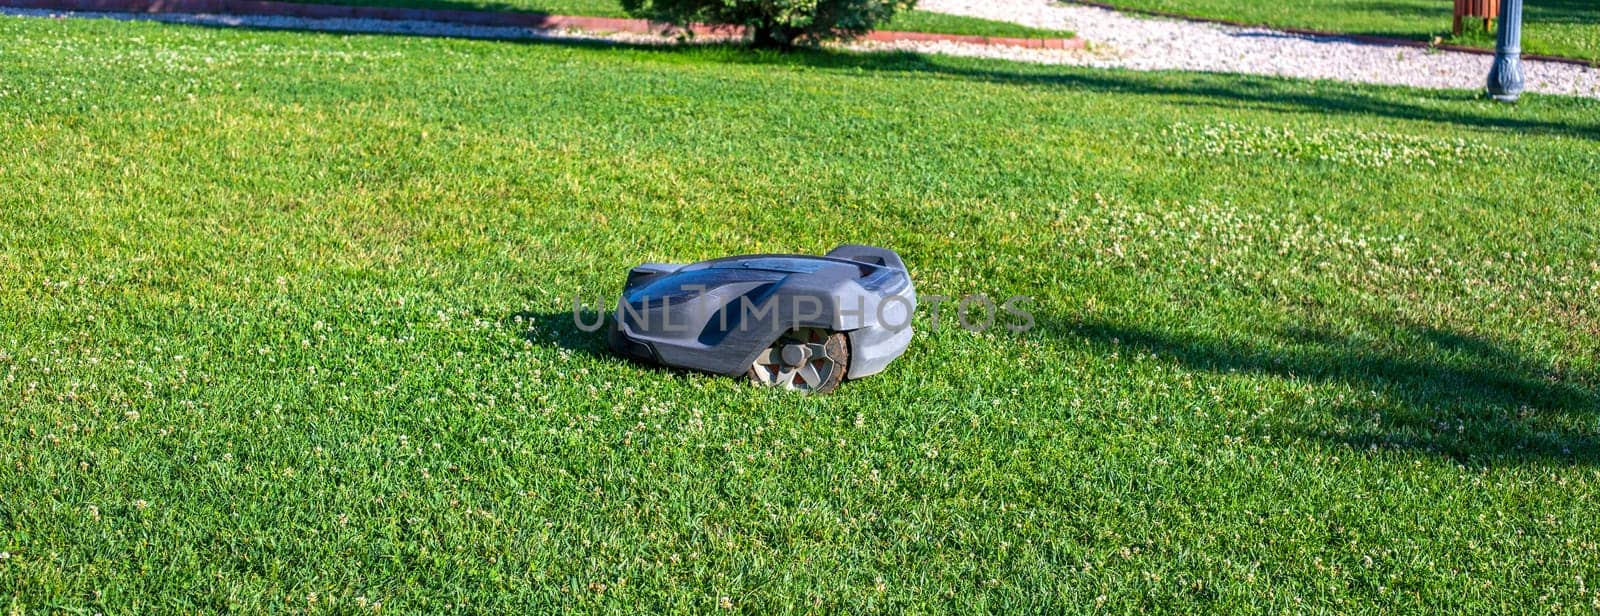 Lawn robot mows the lawn. Robotic Lawn Mower cutting grass by EdVal